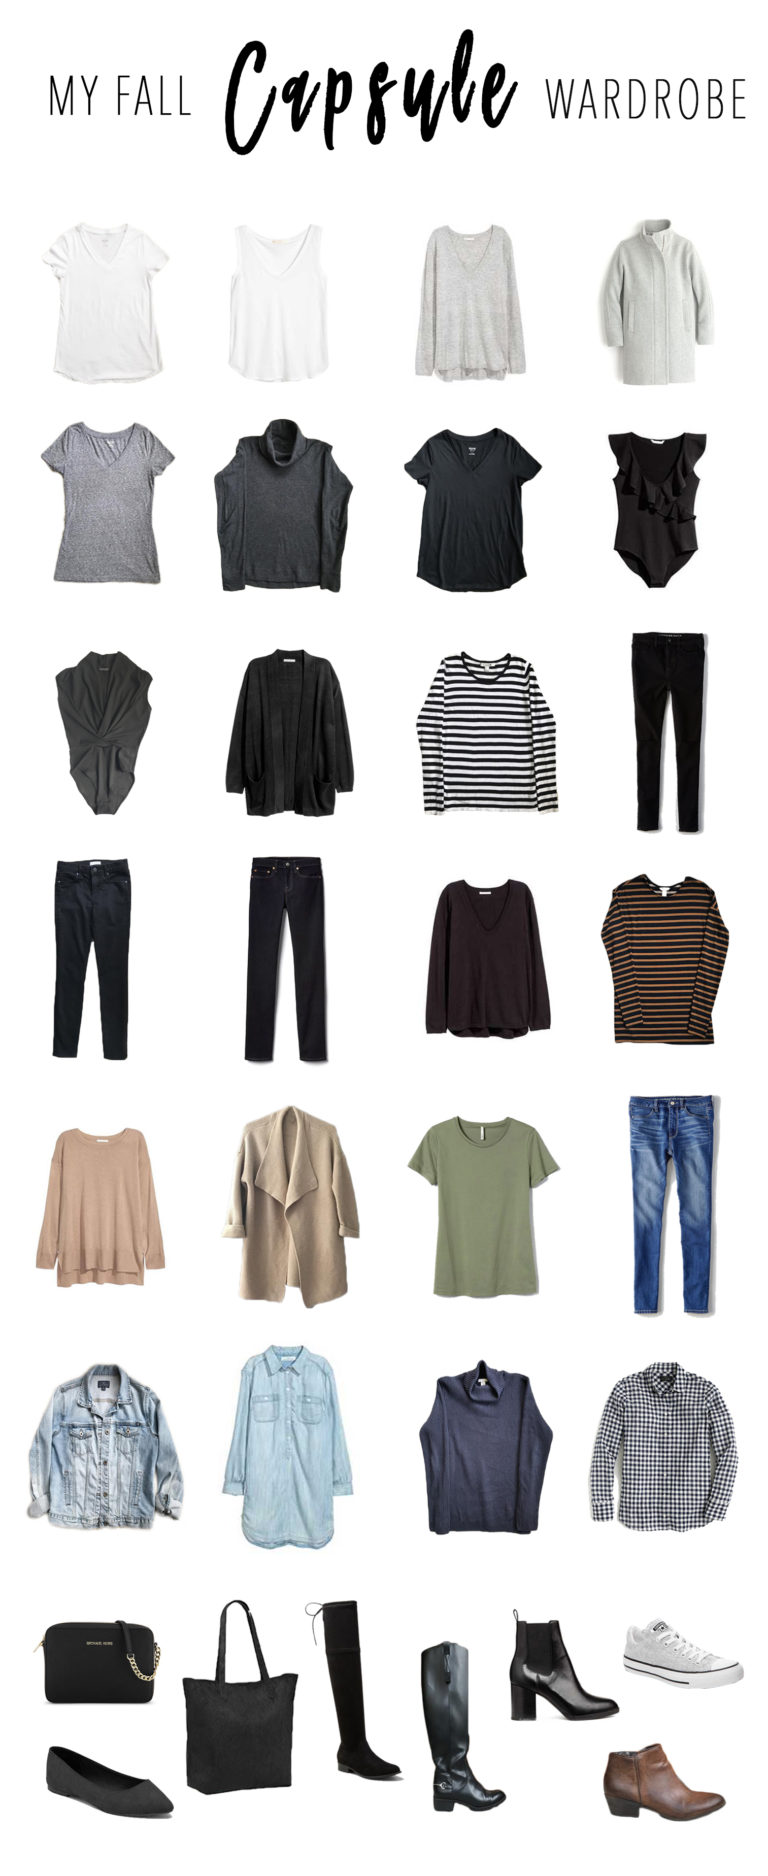 Fall Capsule Wardrobe Tips That Will Make Your Everyday Life Easier